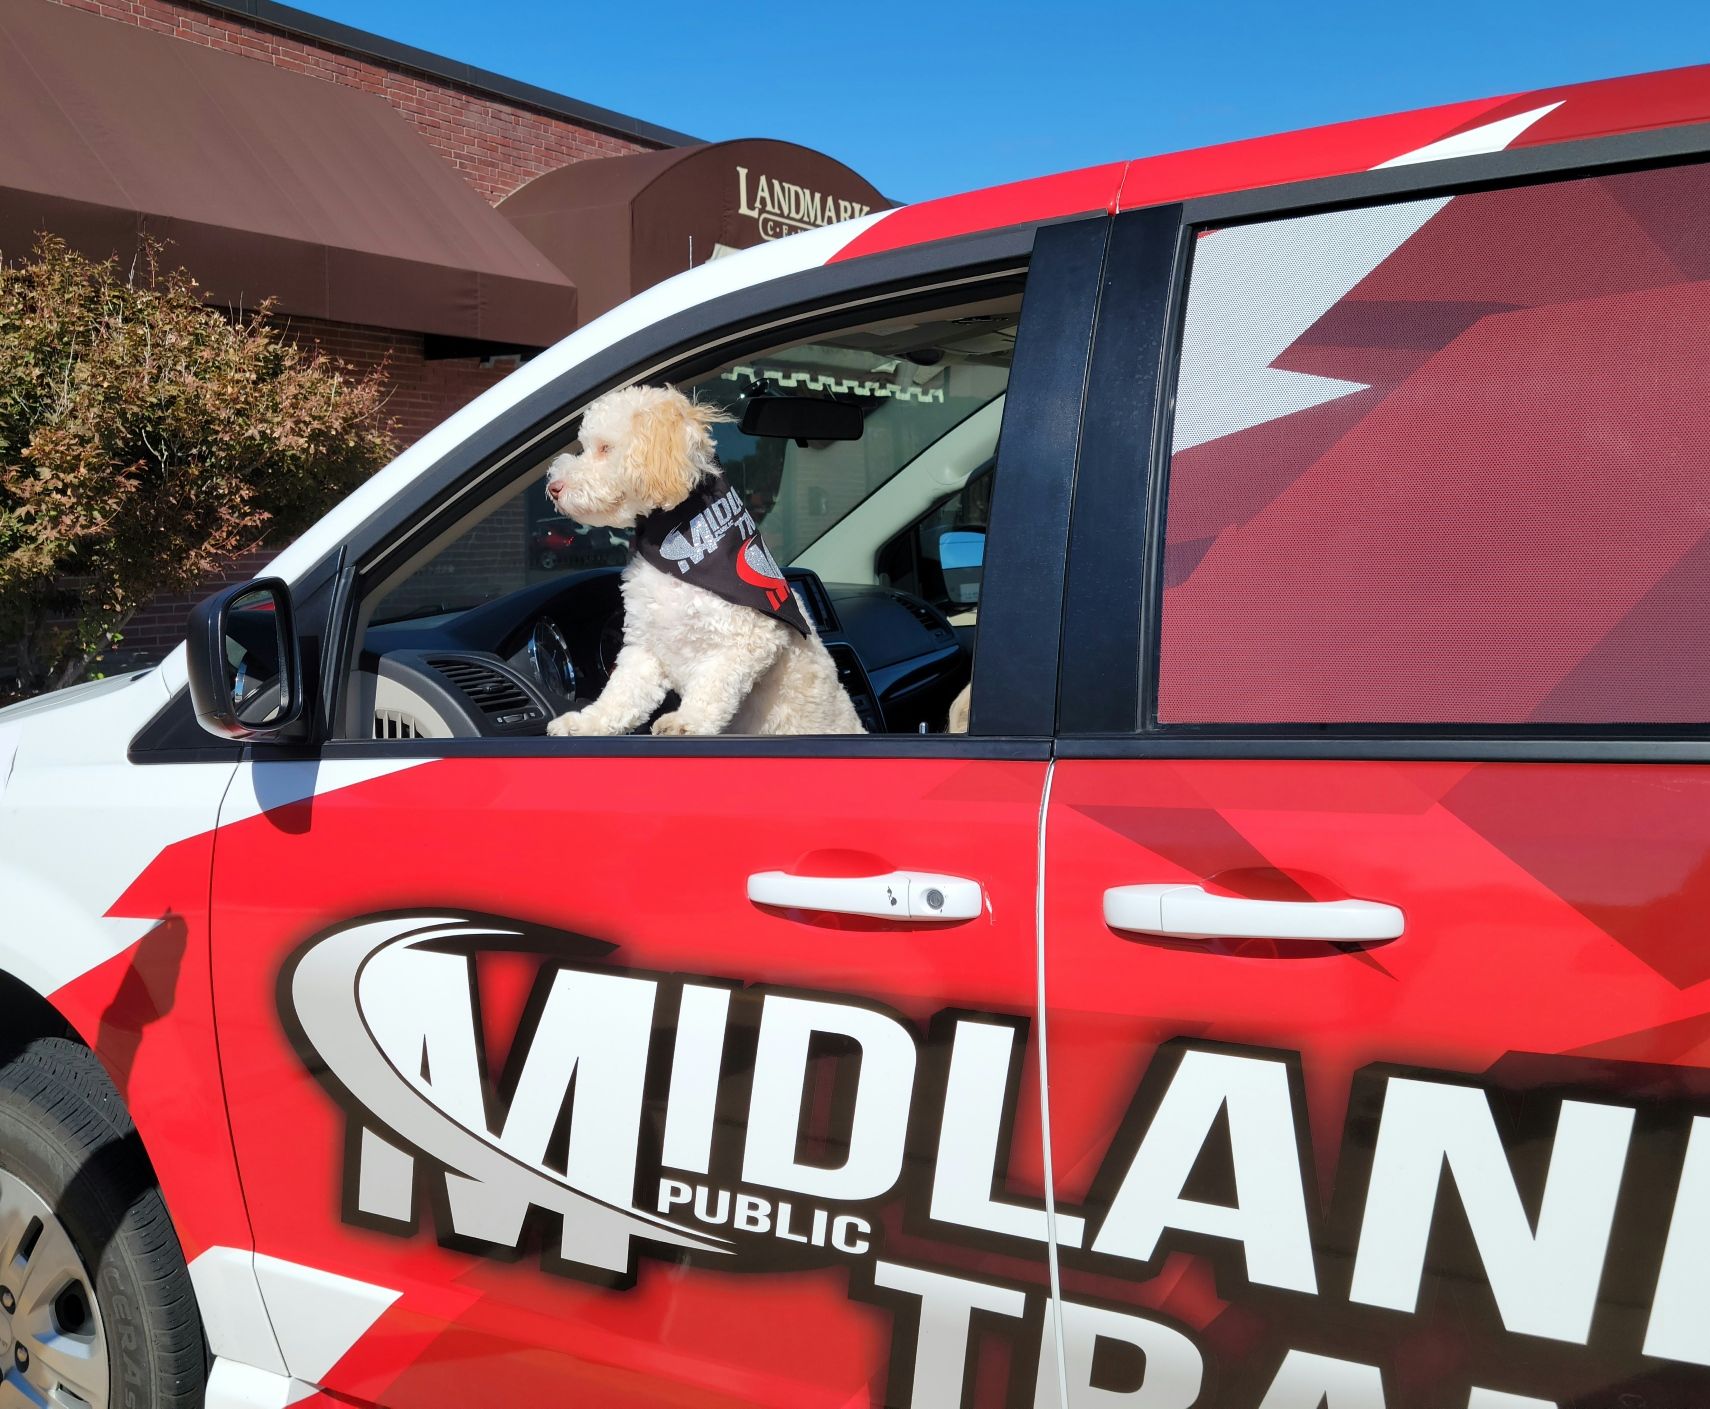 photo of a dog in the window of a Midland Public Transit van